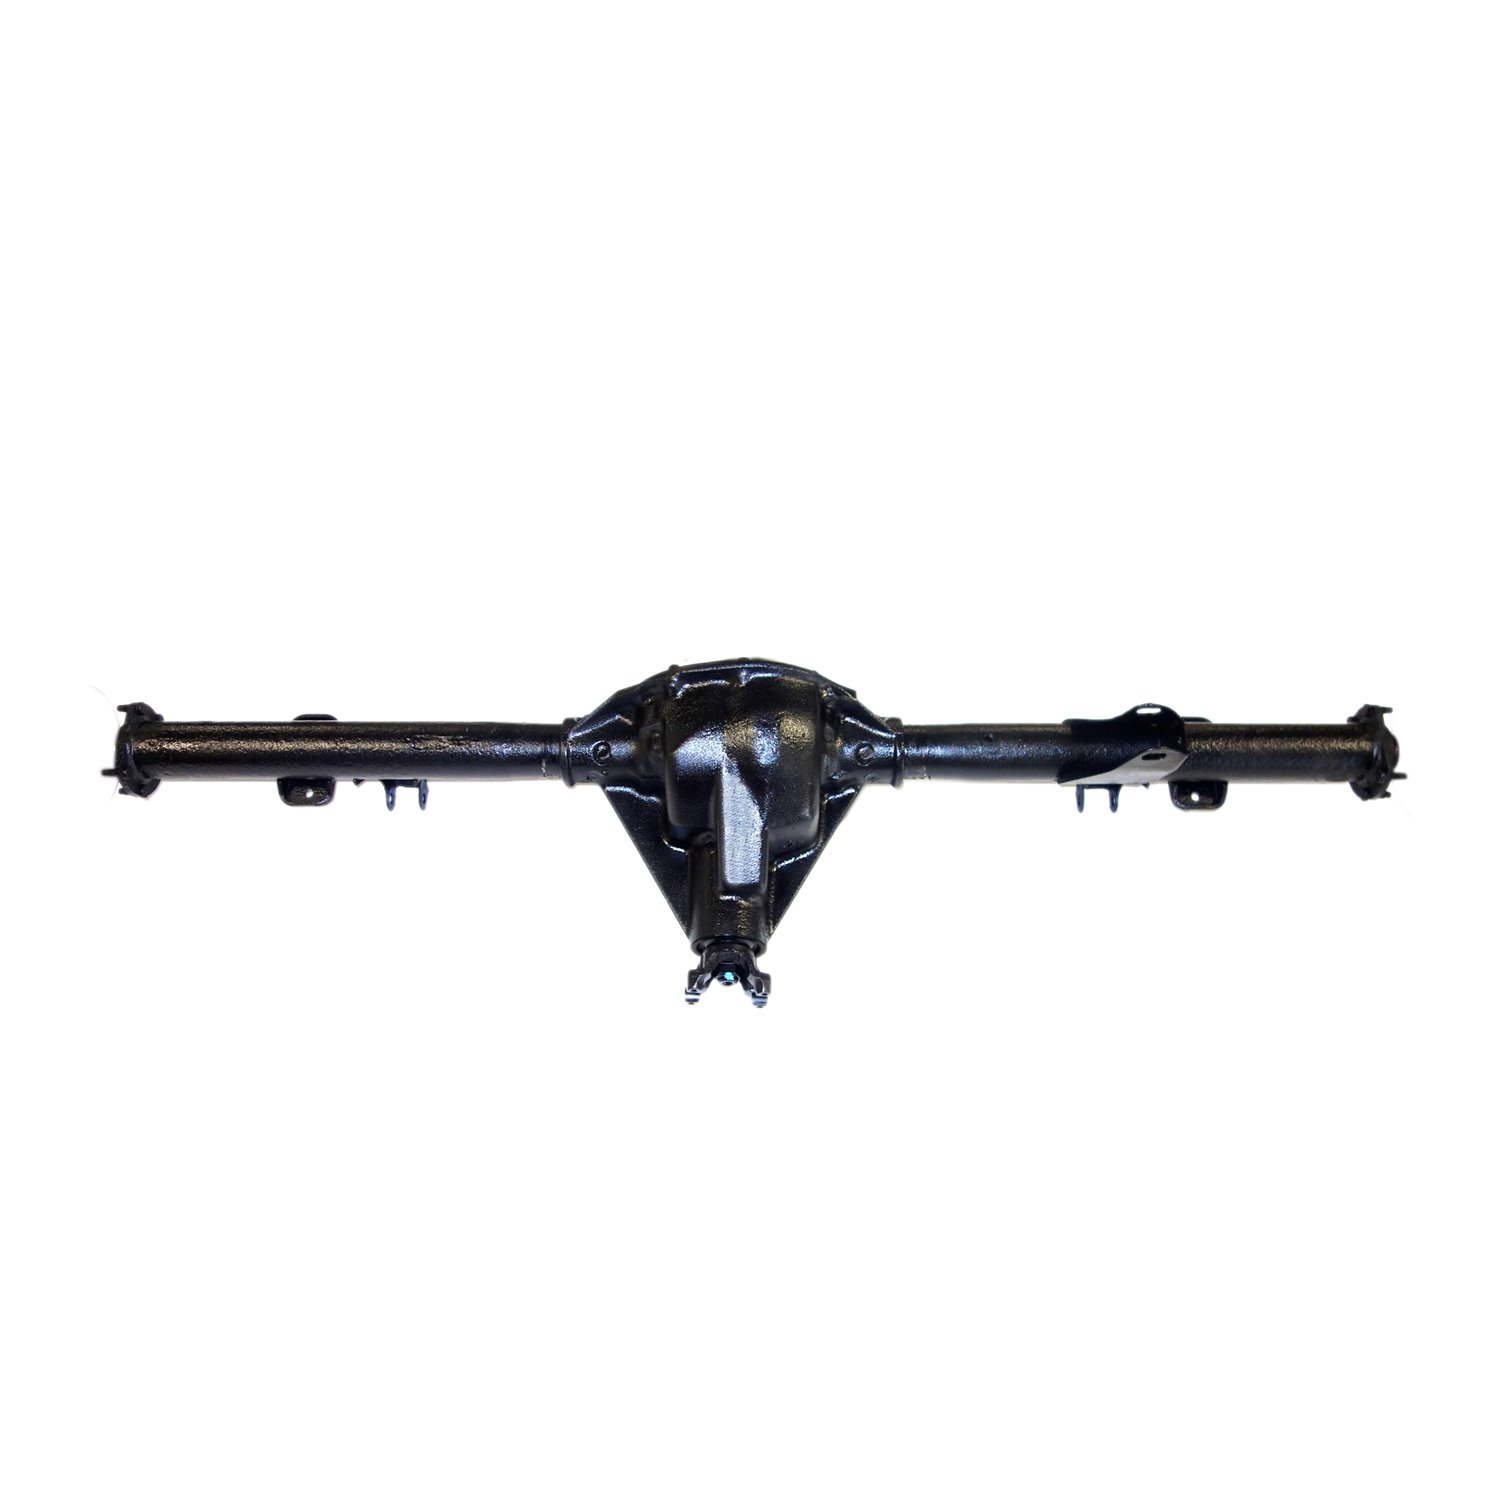 Remanufactured Complete Axle Assy for Dana 35 90-01 Cherokee, 90 Wagoneer, 3.73 with ABS